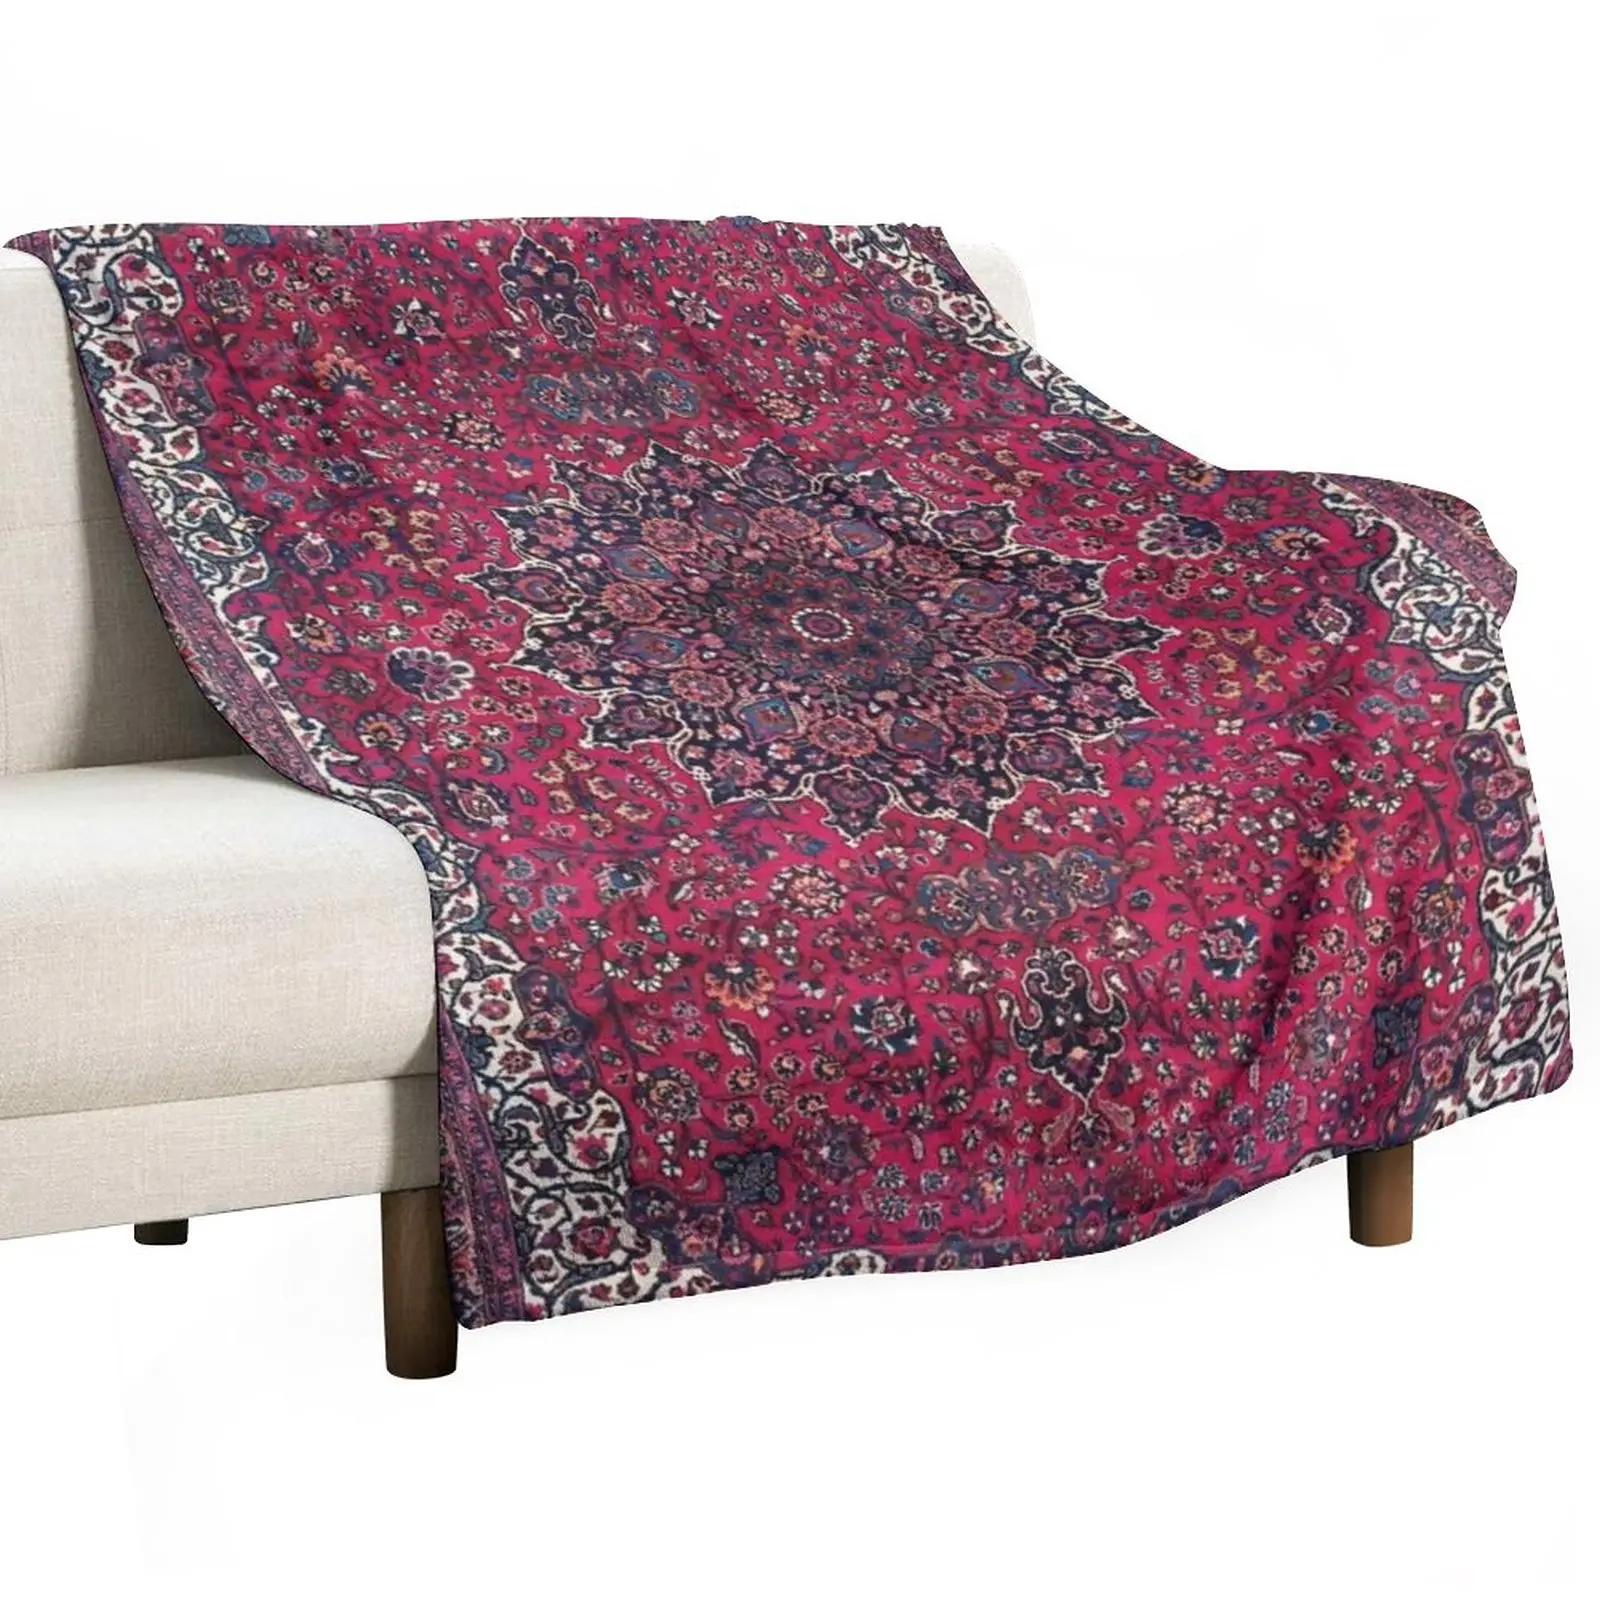 

Saber Meshed Persian Carpet Print Throw Blanket Decorative Bed Blankets Hairy Blankets Furry Blankets